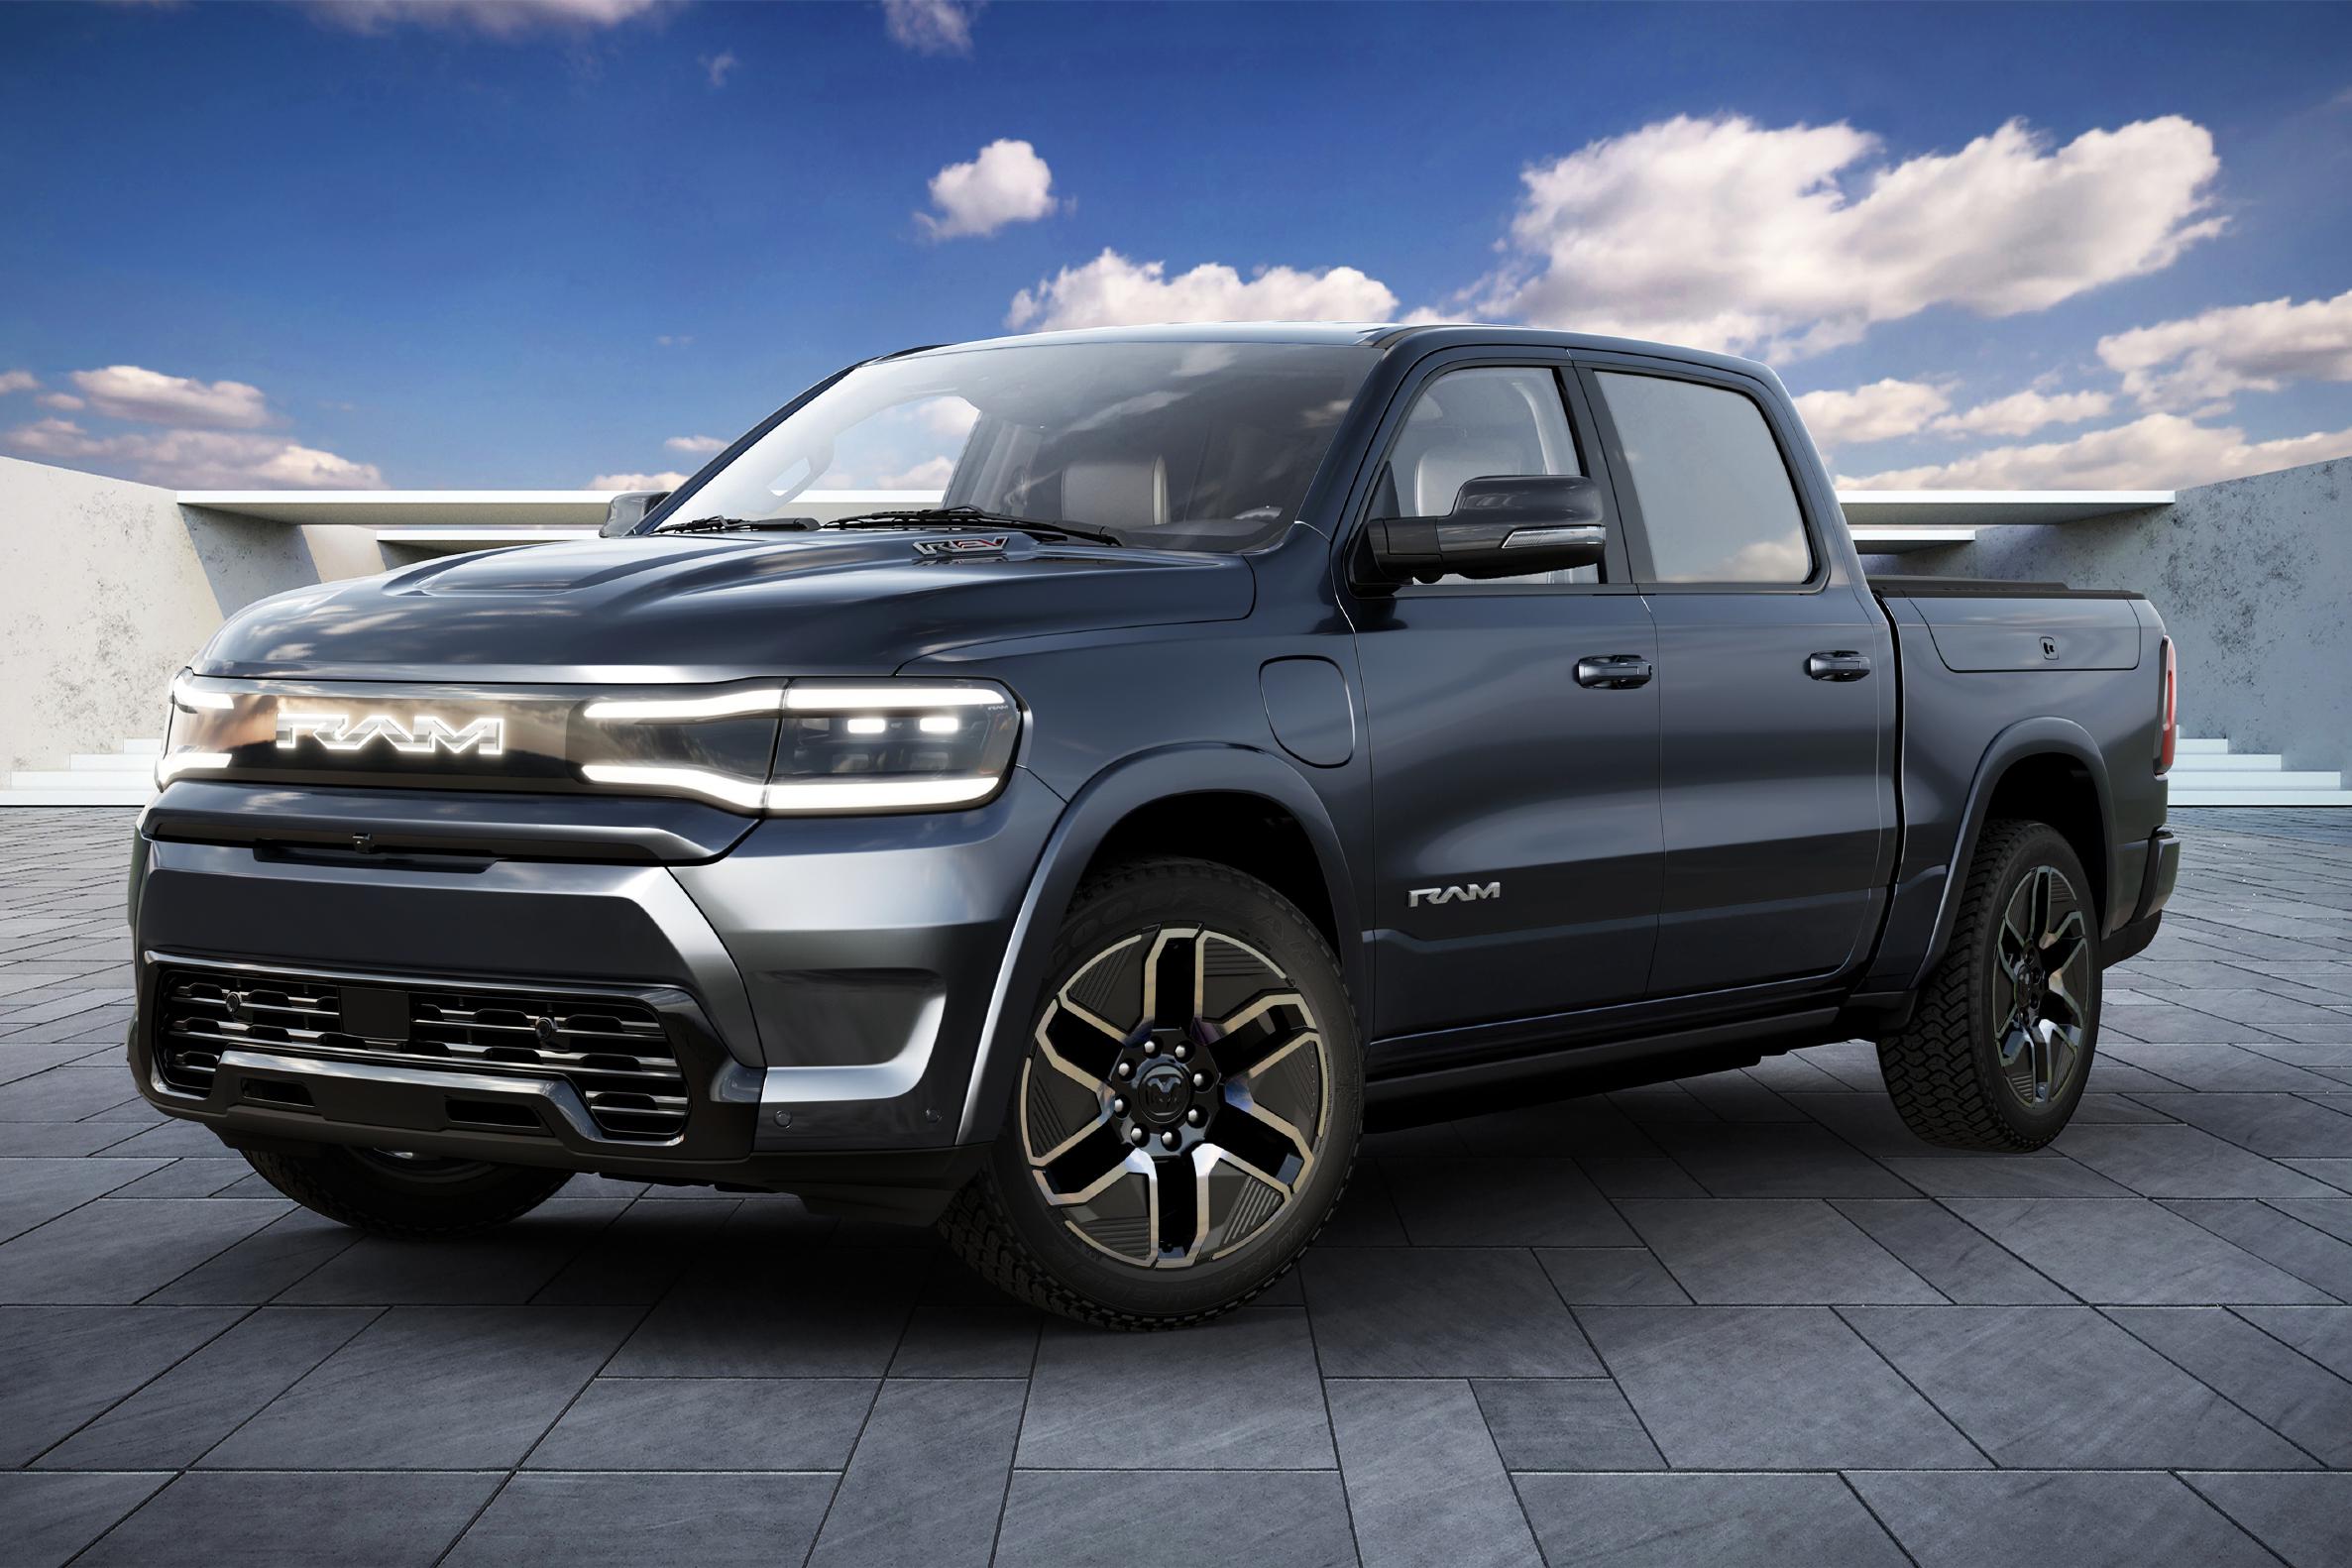 New Ford Ranger Revealed, Previewing Upcoming U.S. Truck